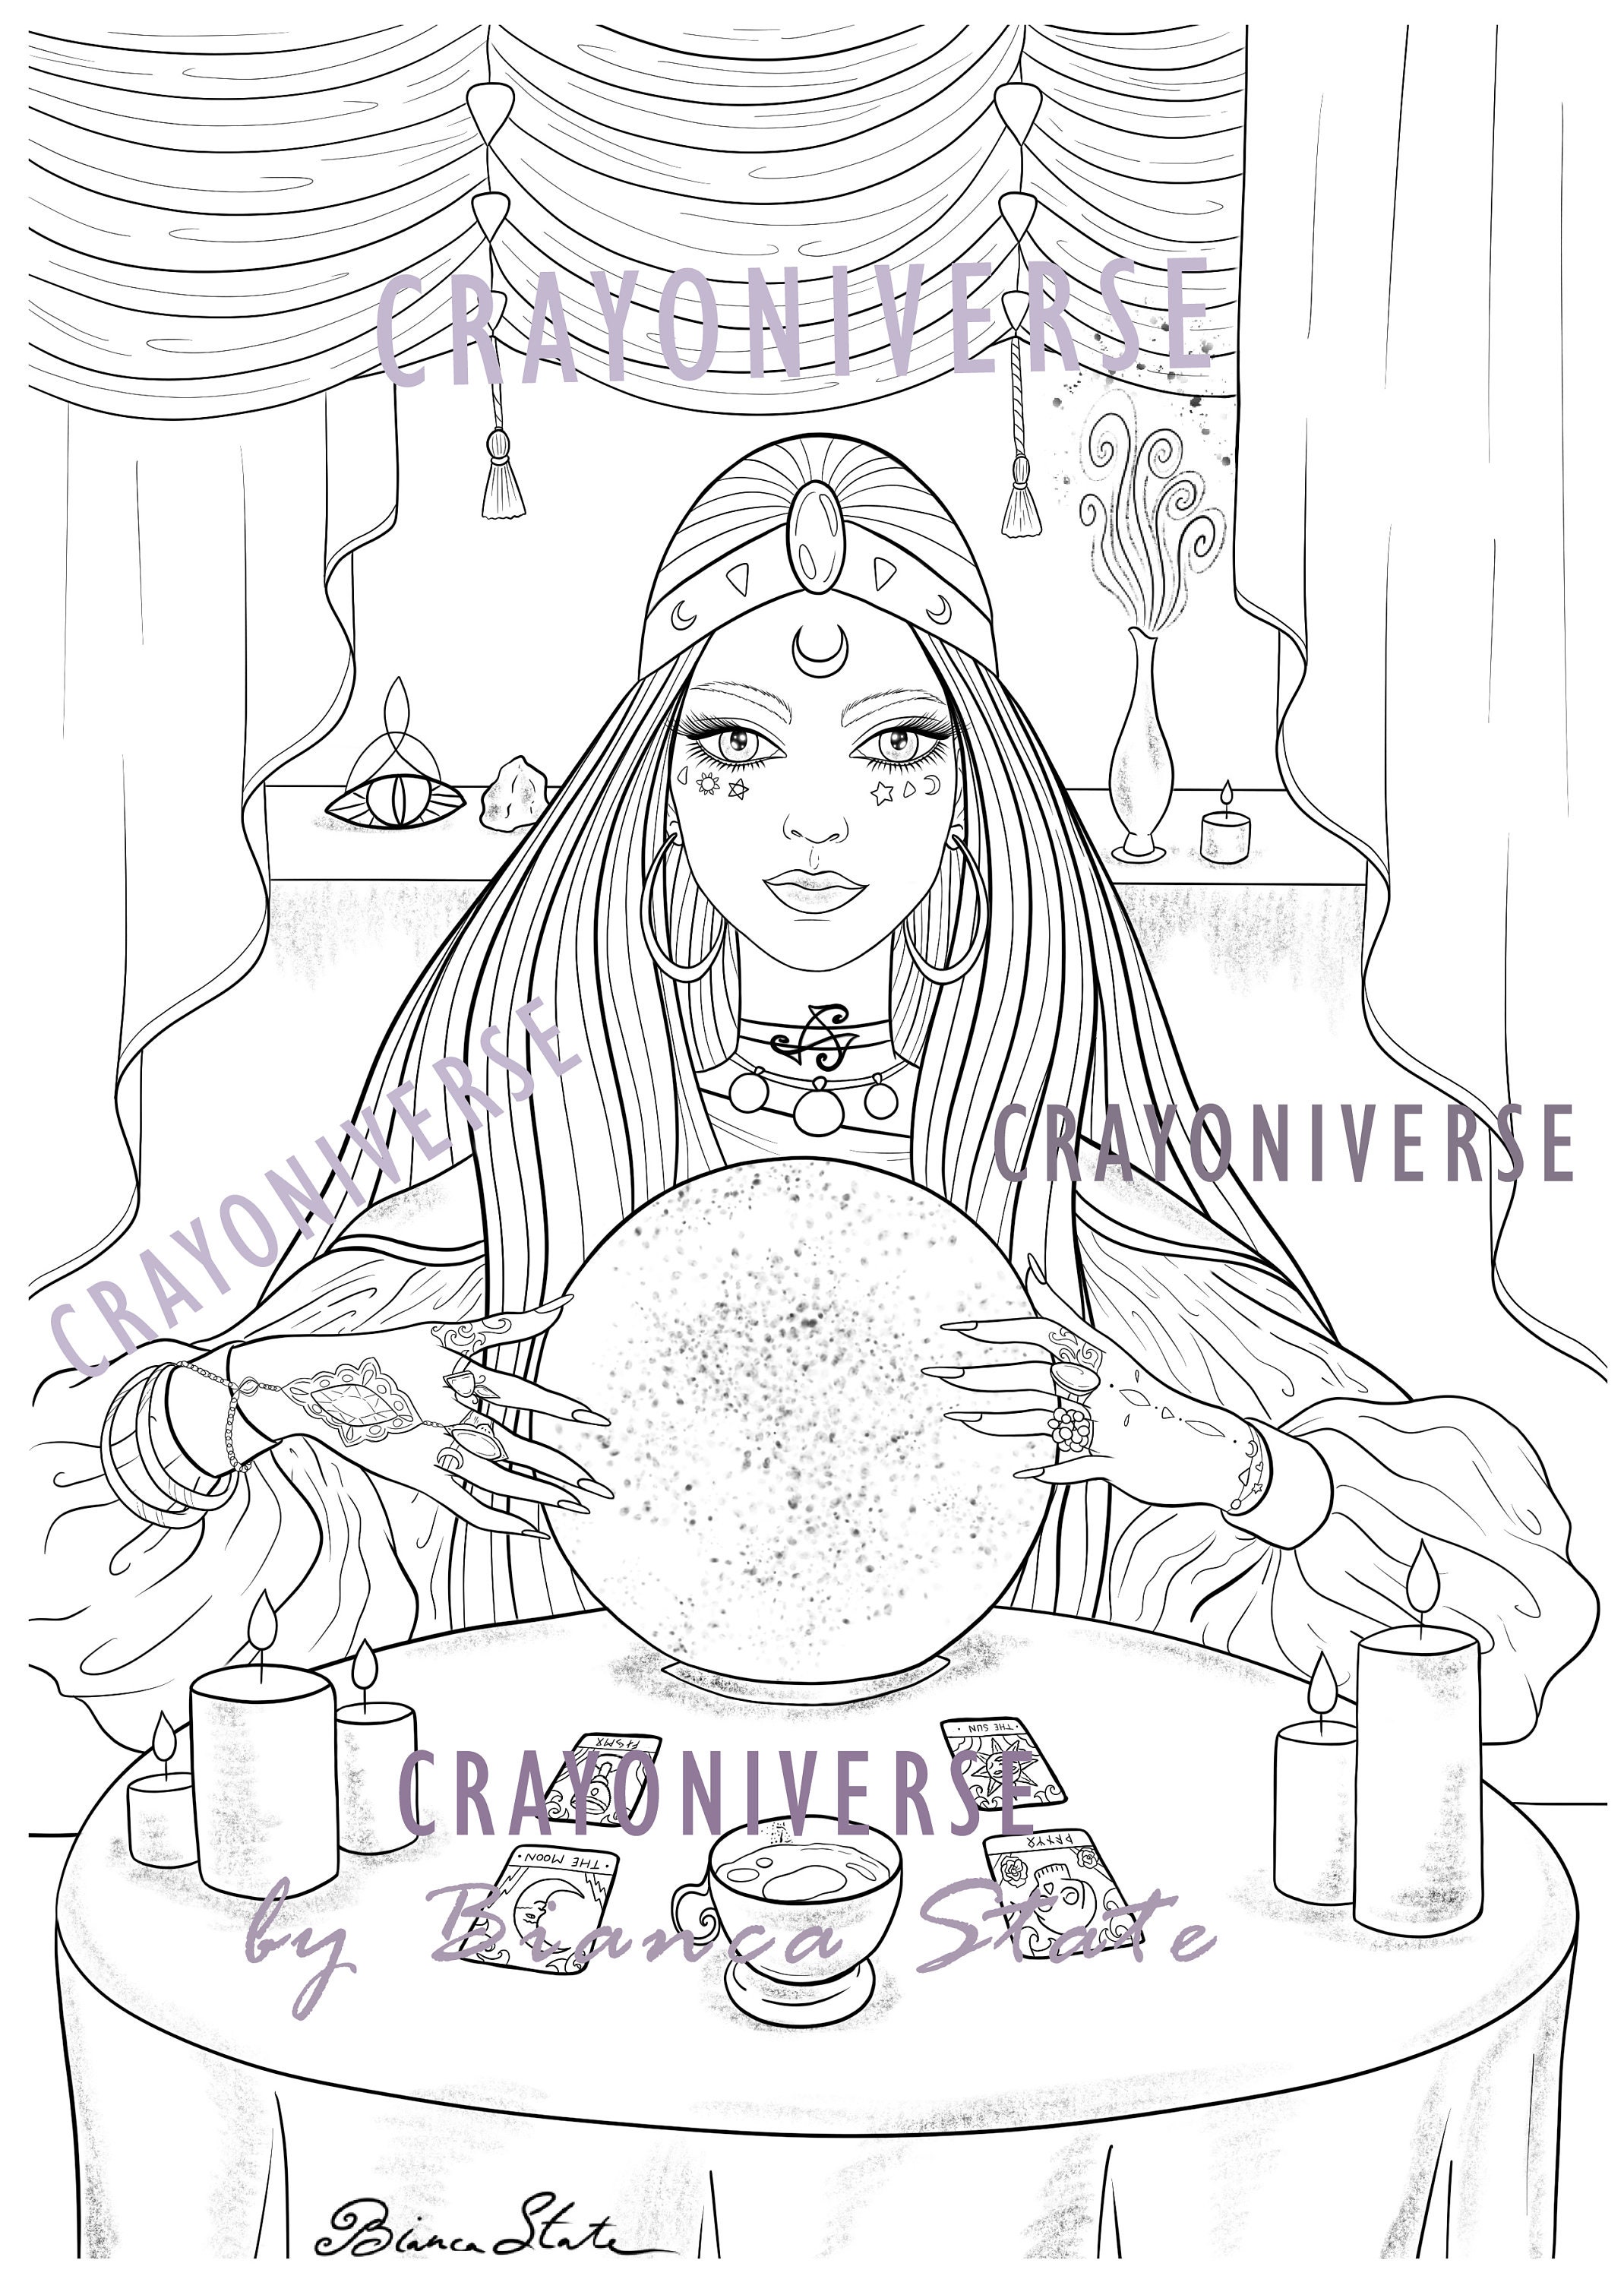 Fortune Teller Lineart Coloring Page PDF and JPG by Bianca - Etsy